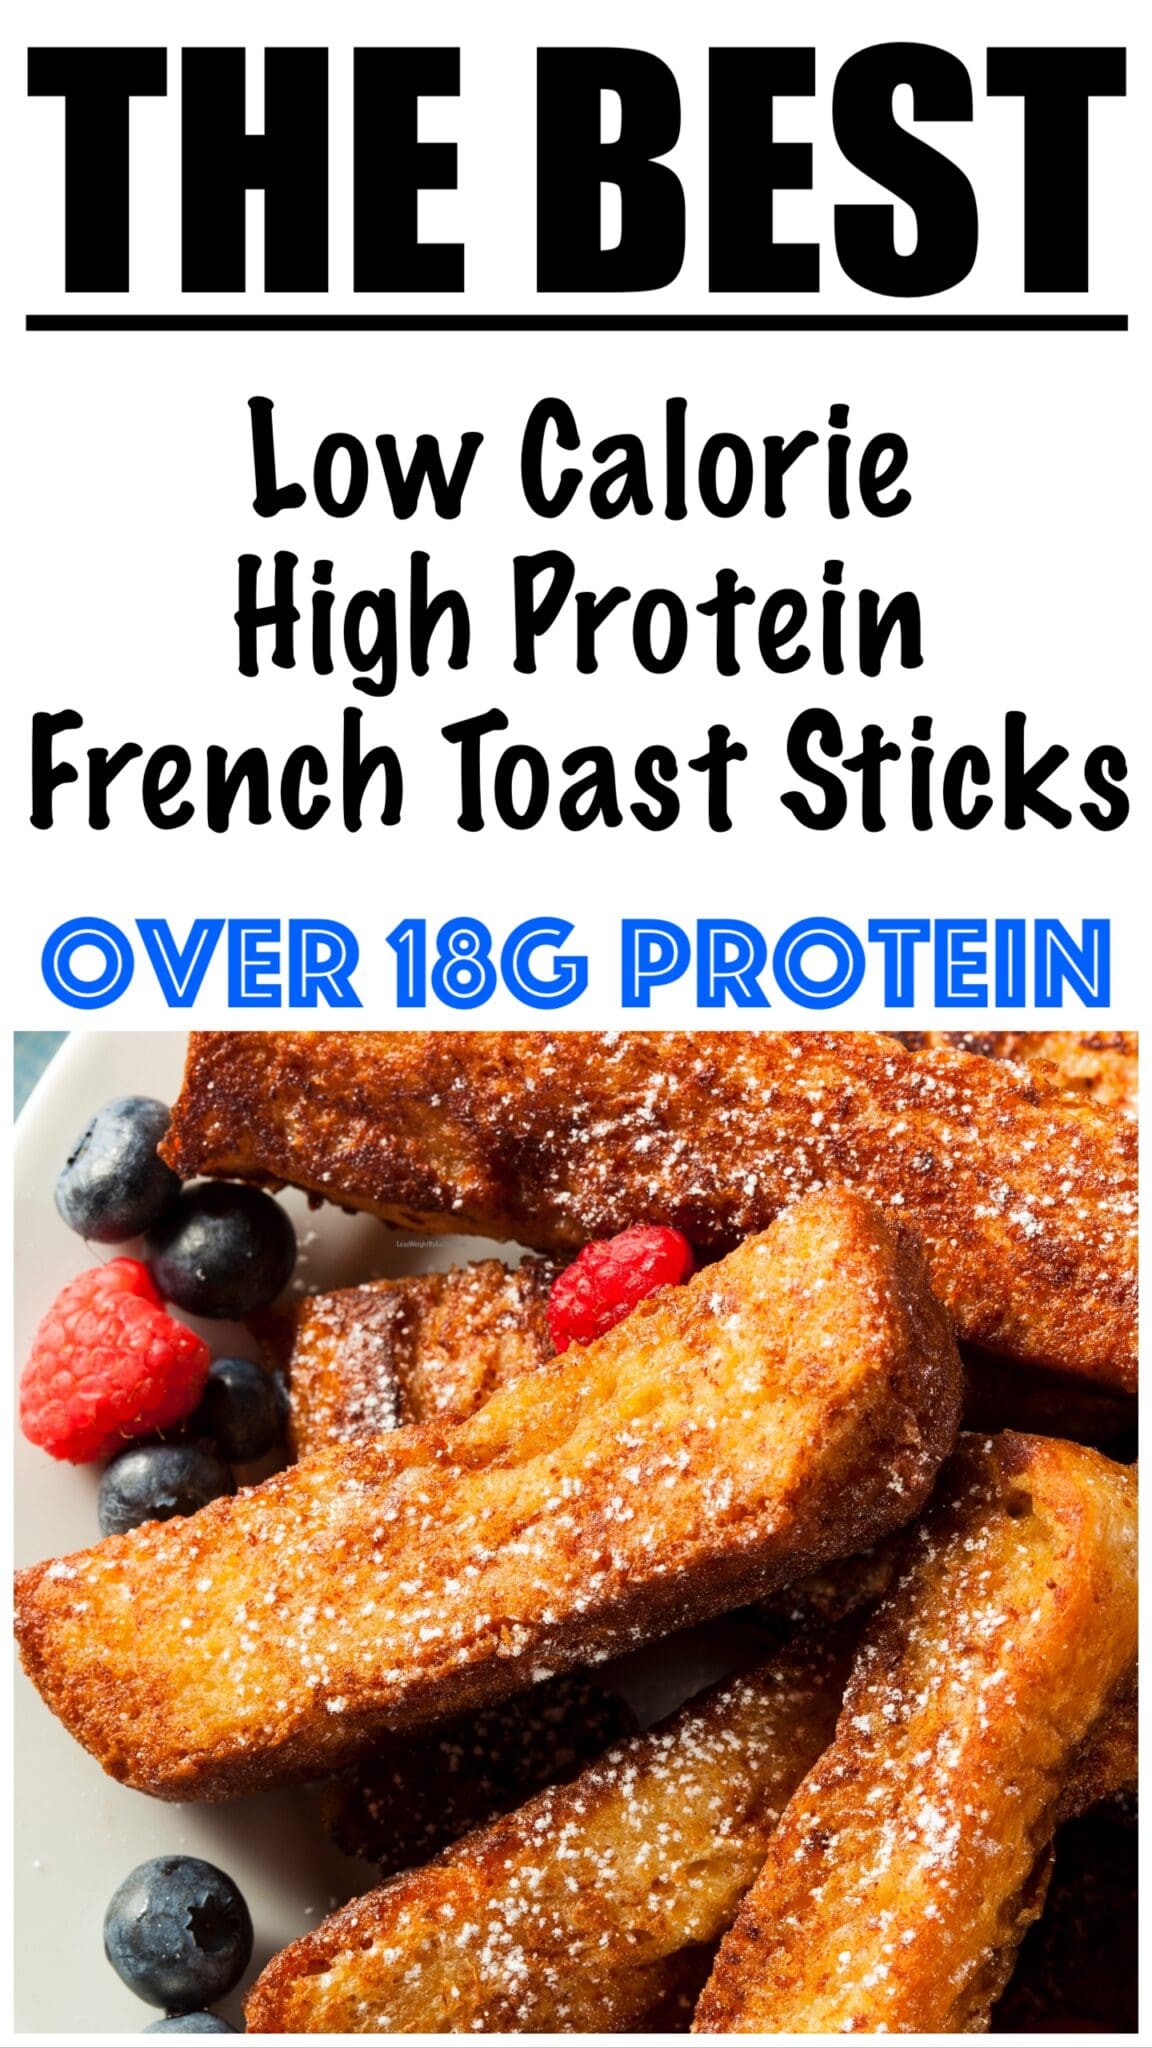 Low Calorie High Protein French Toast Sticks - Lose Weight By Eating